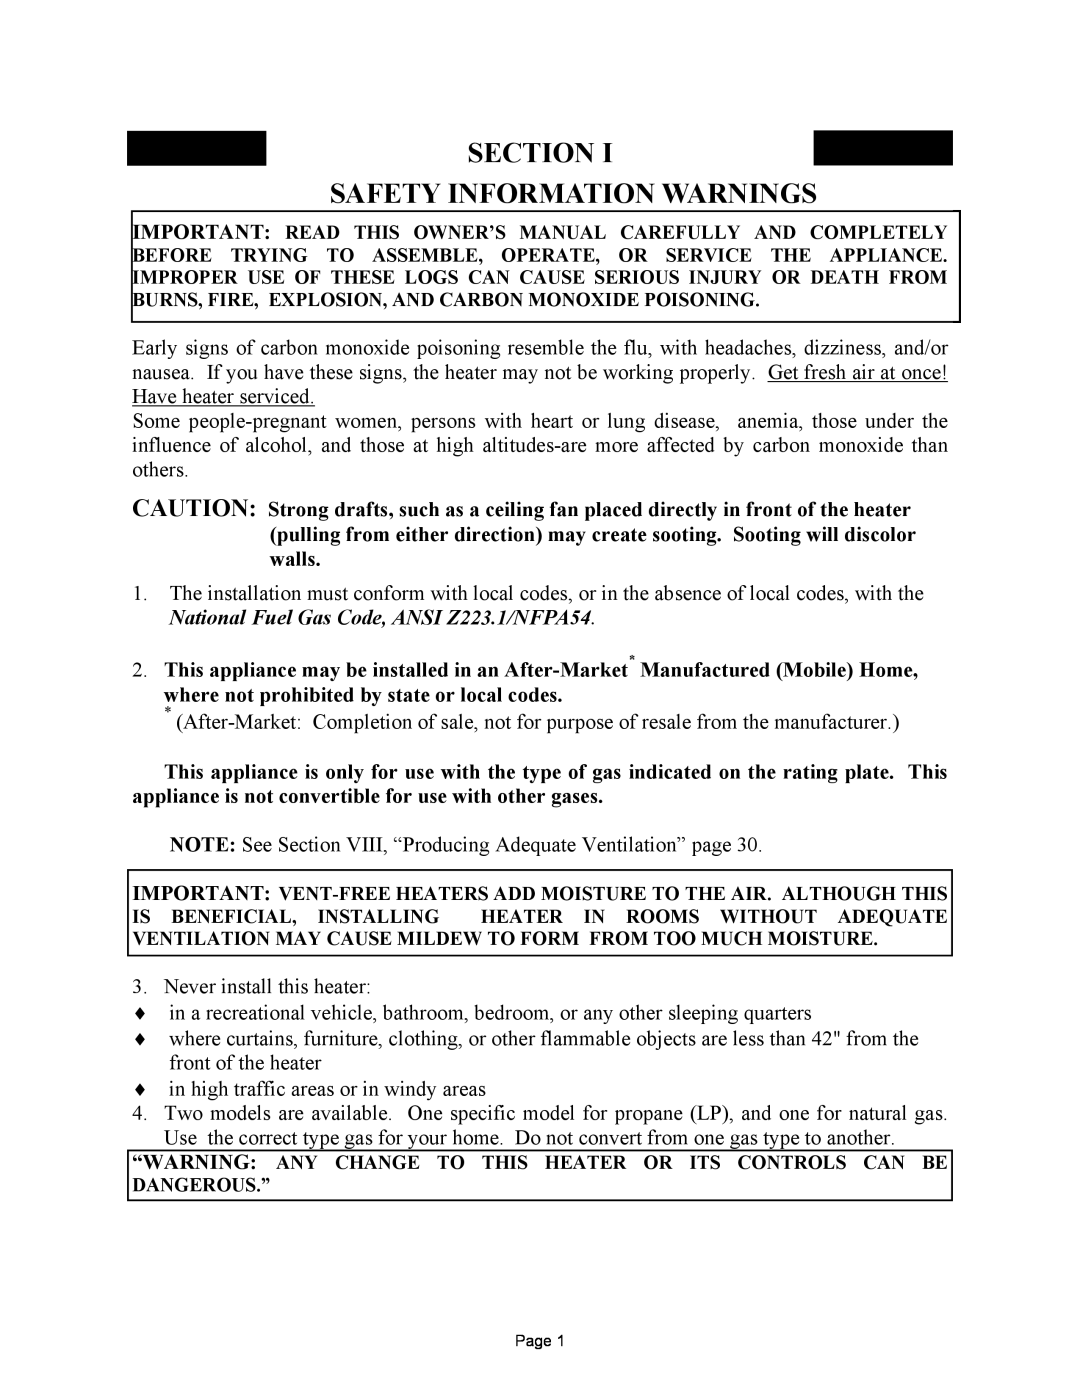 New Buck Corporation 384 manual Section I Safety Information Warnings 